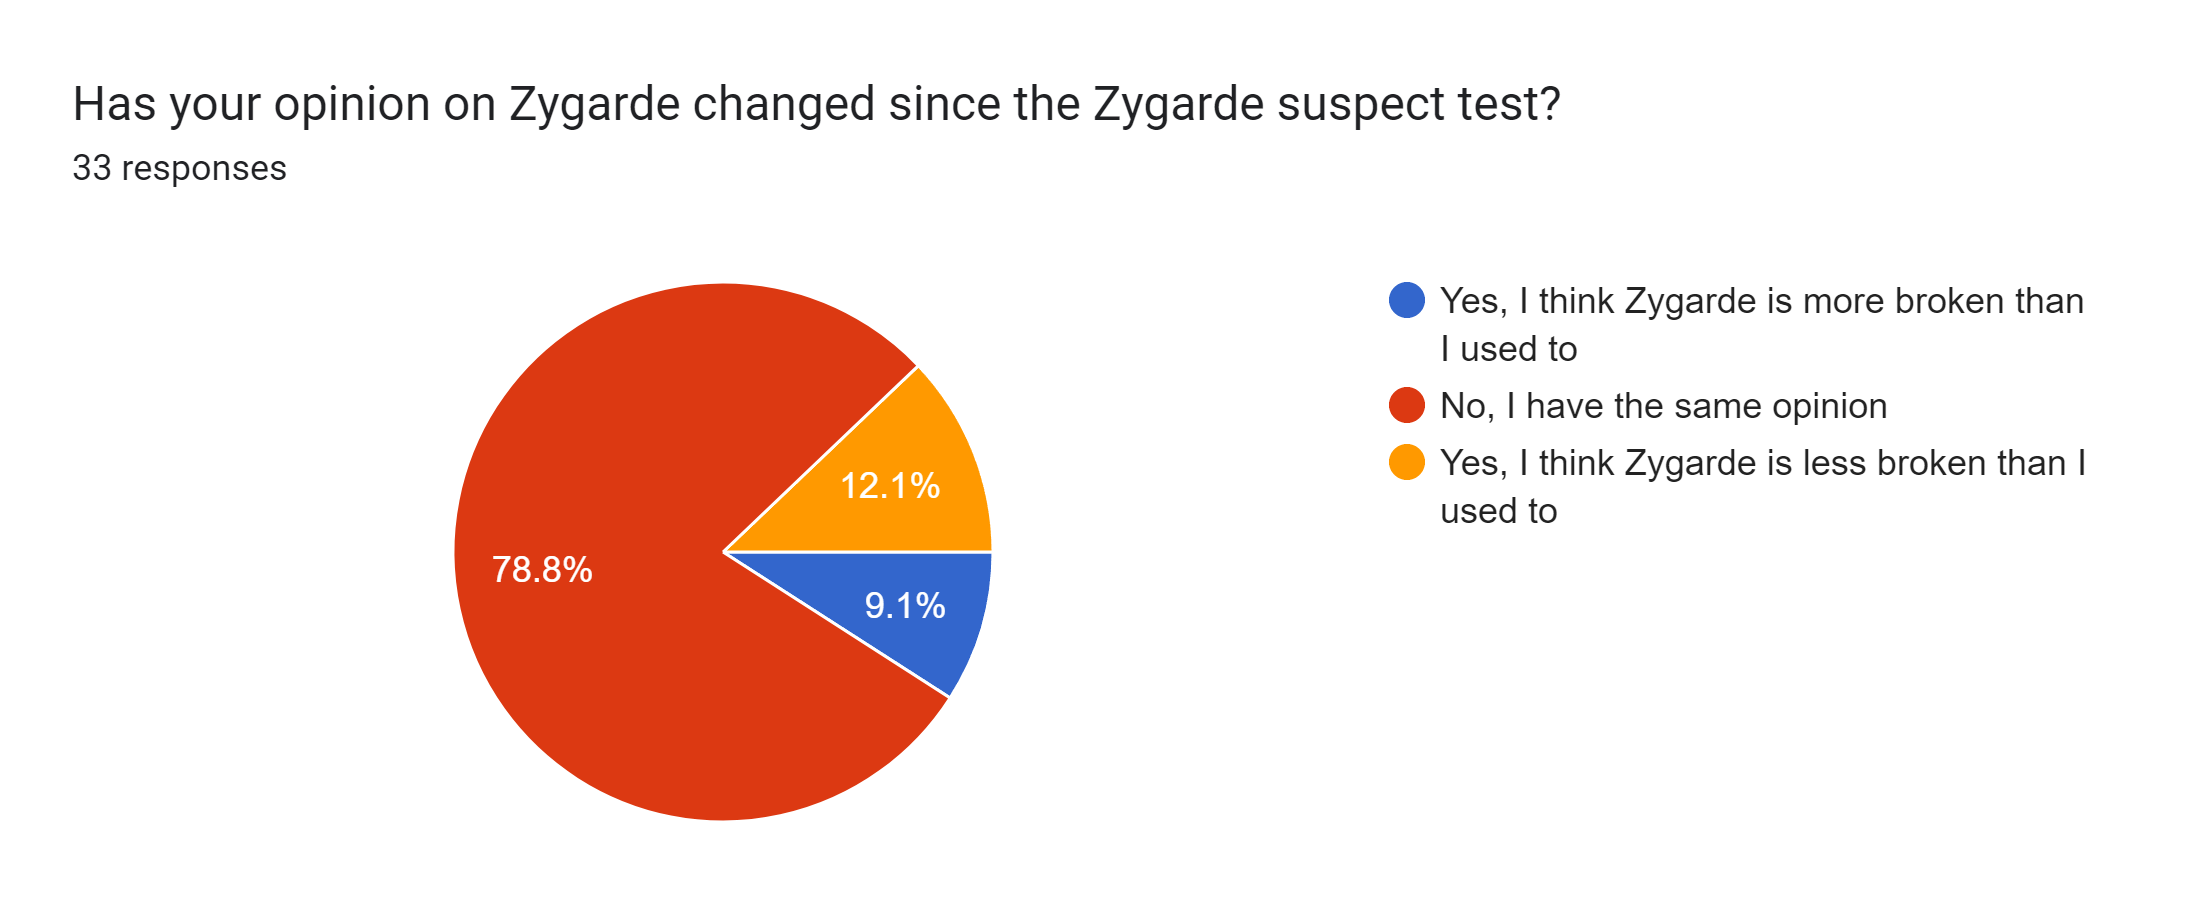 Forms response chart. Question title: Has your opinion on Zygarde changed since the Zygarde suspect test?. Number of responses: 33 responses.